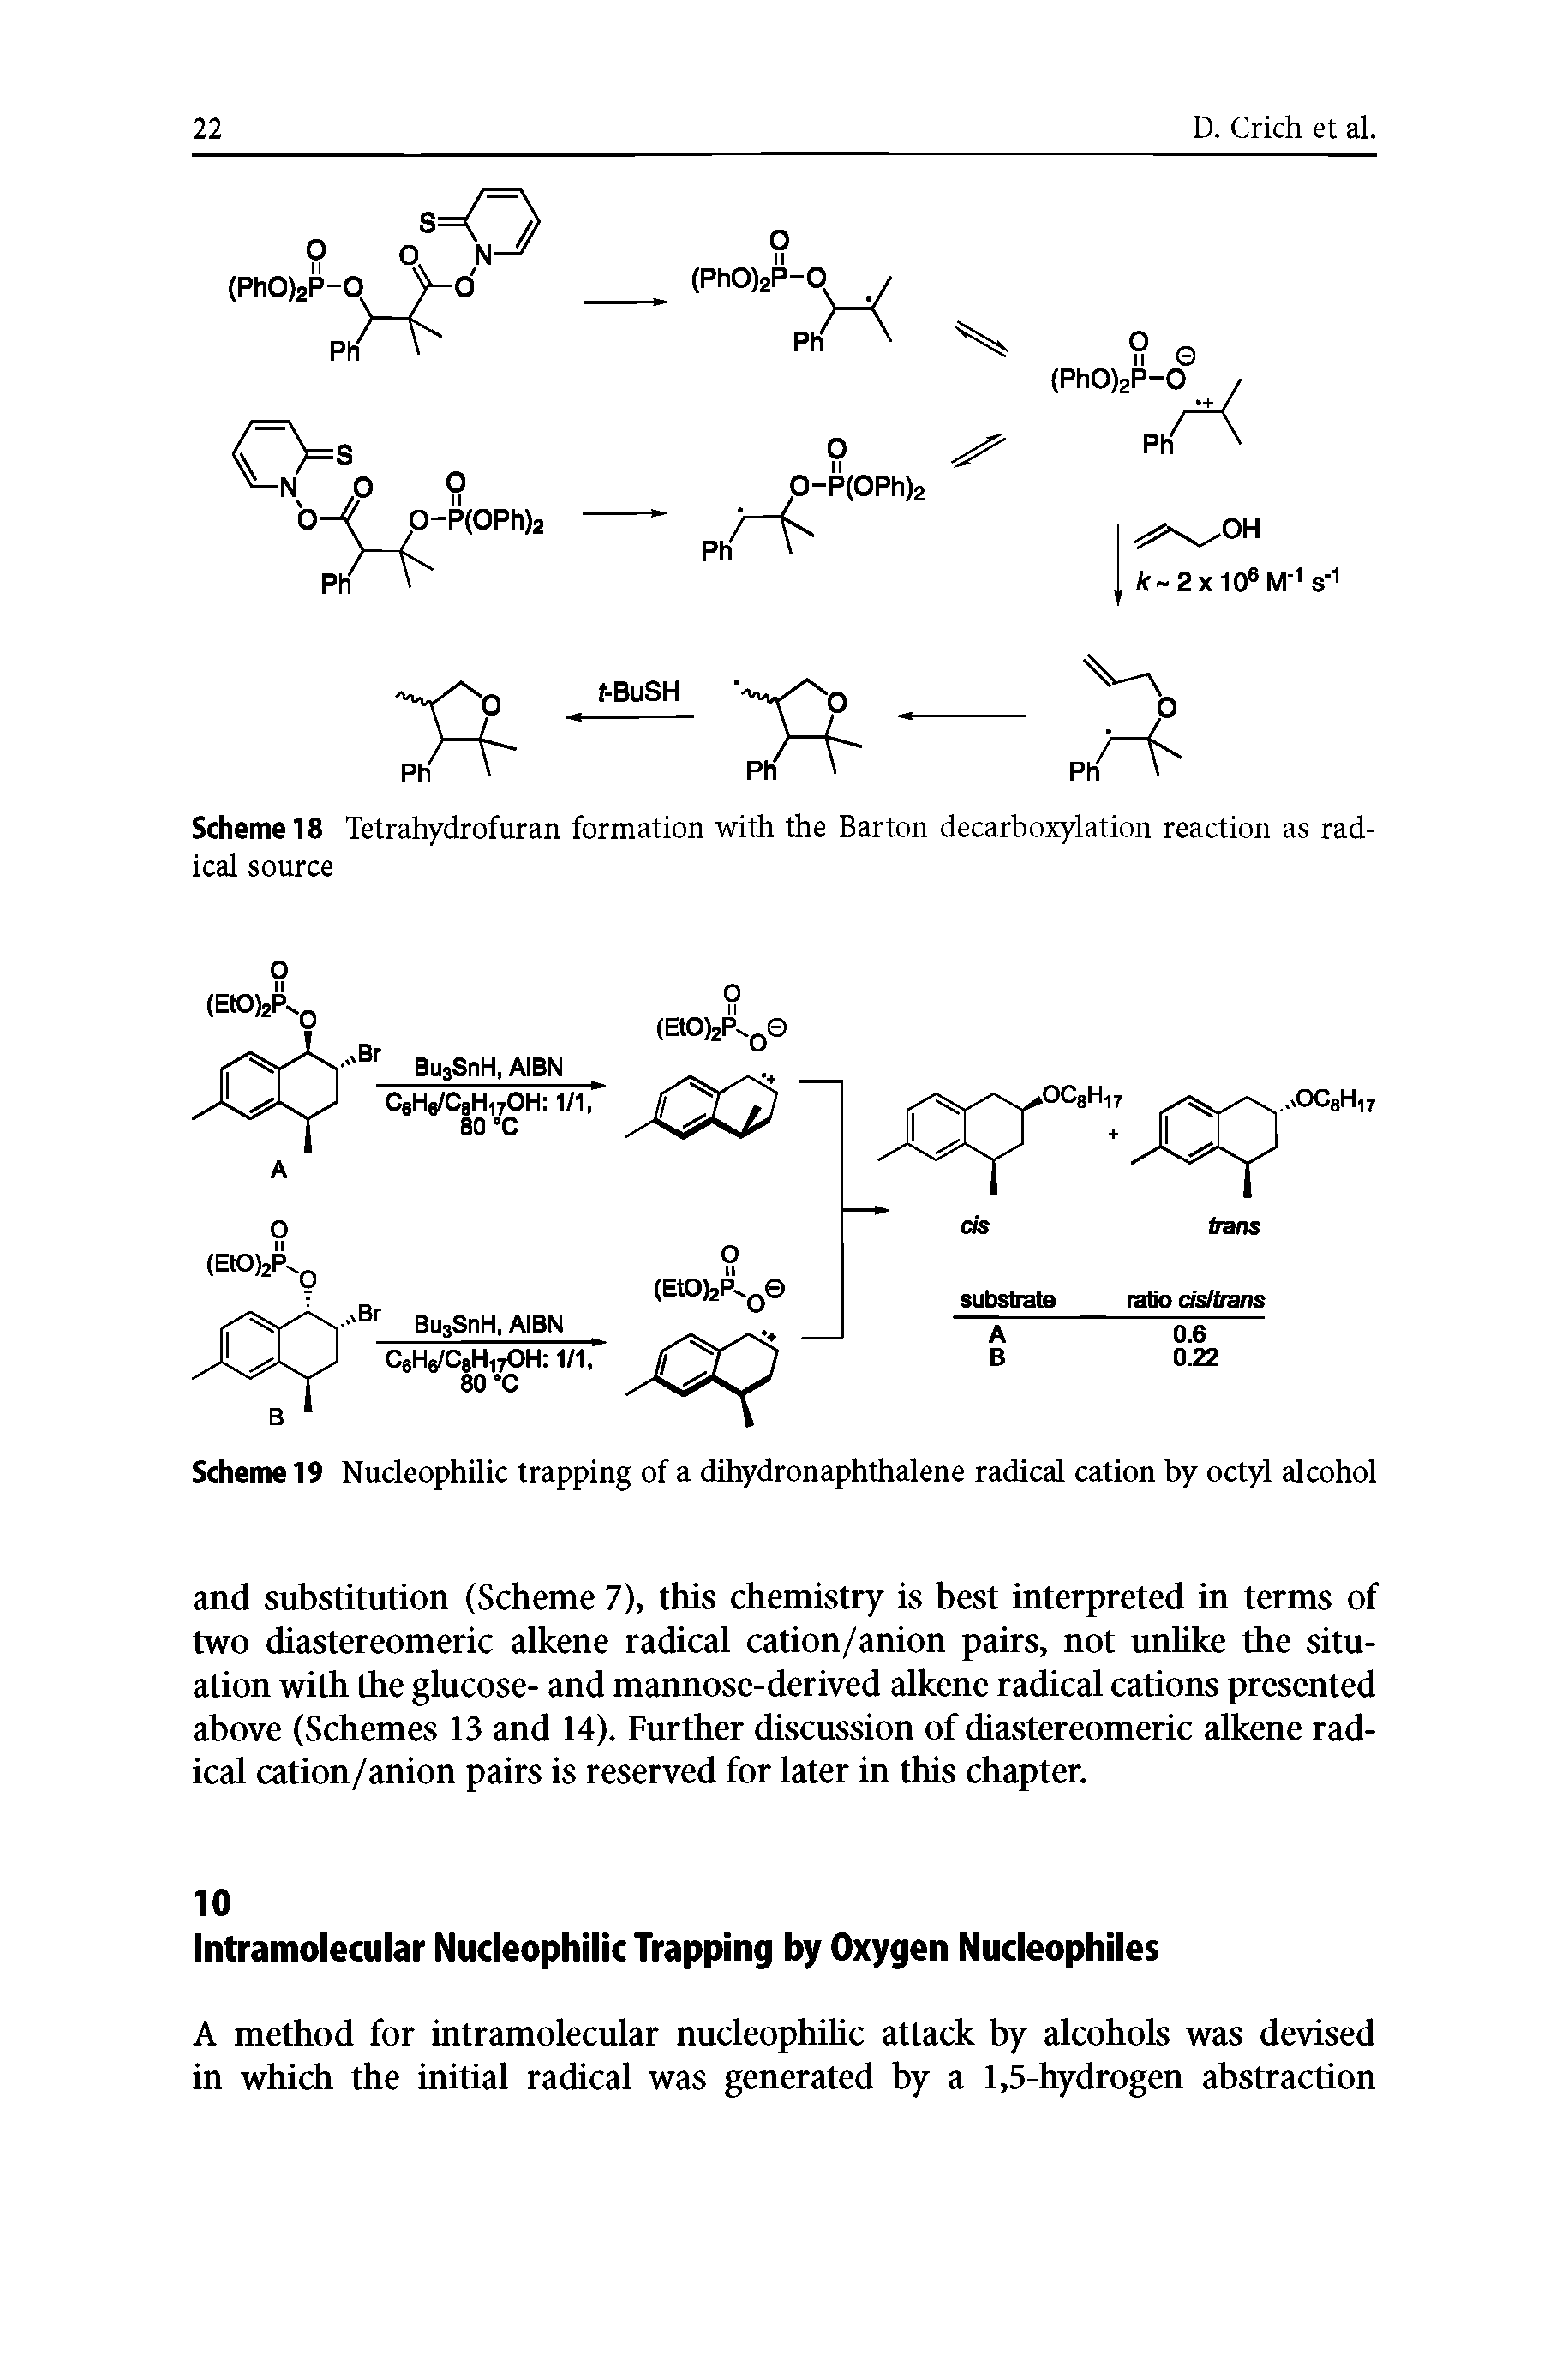 Scheme 19 Nucleophilic trapping of a dihydronaphthalene radical cation by octyl alcohol...